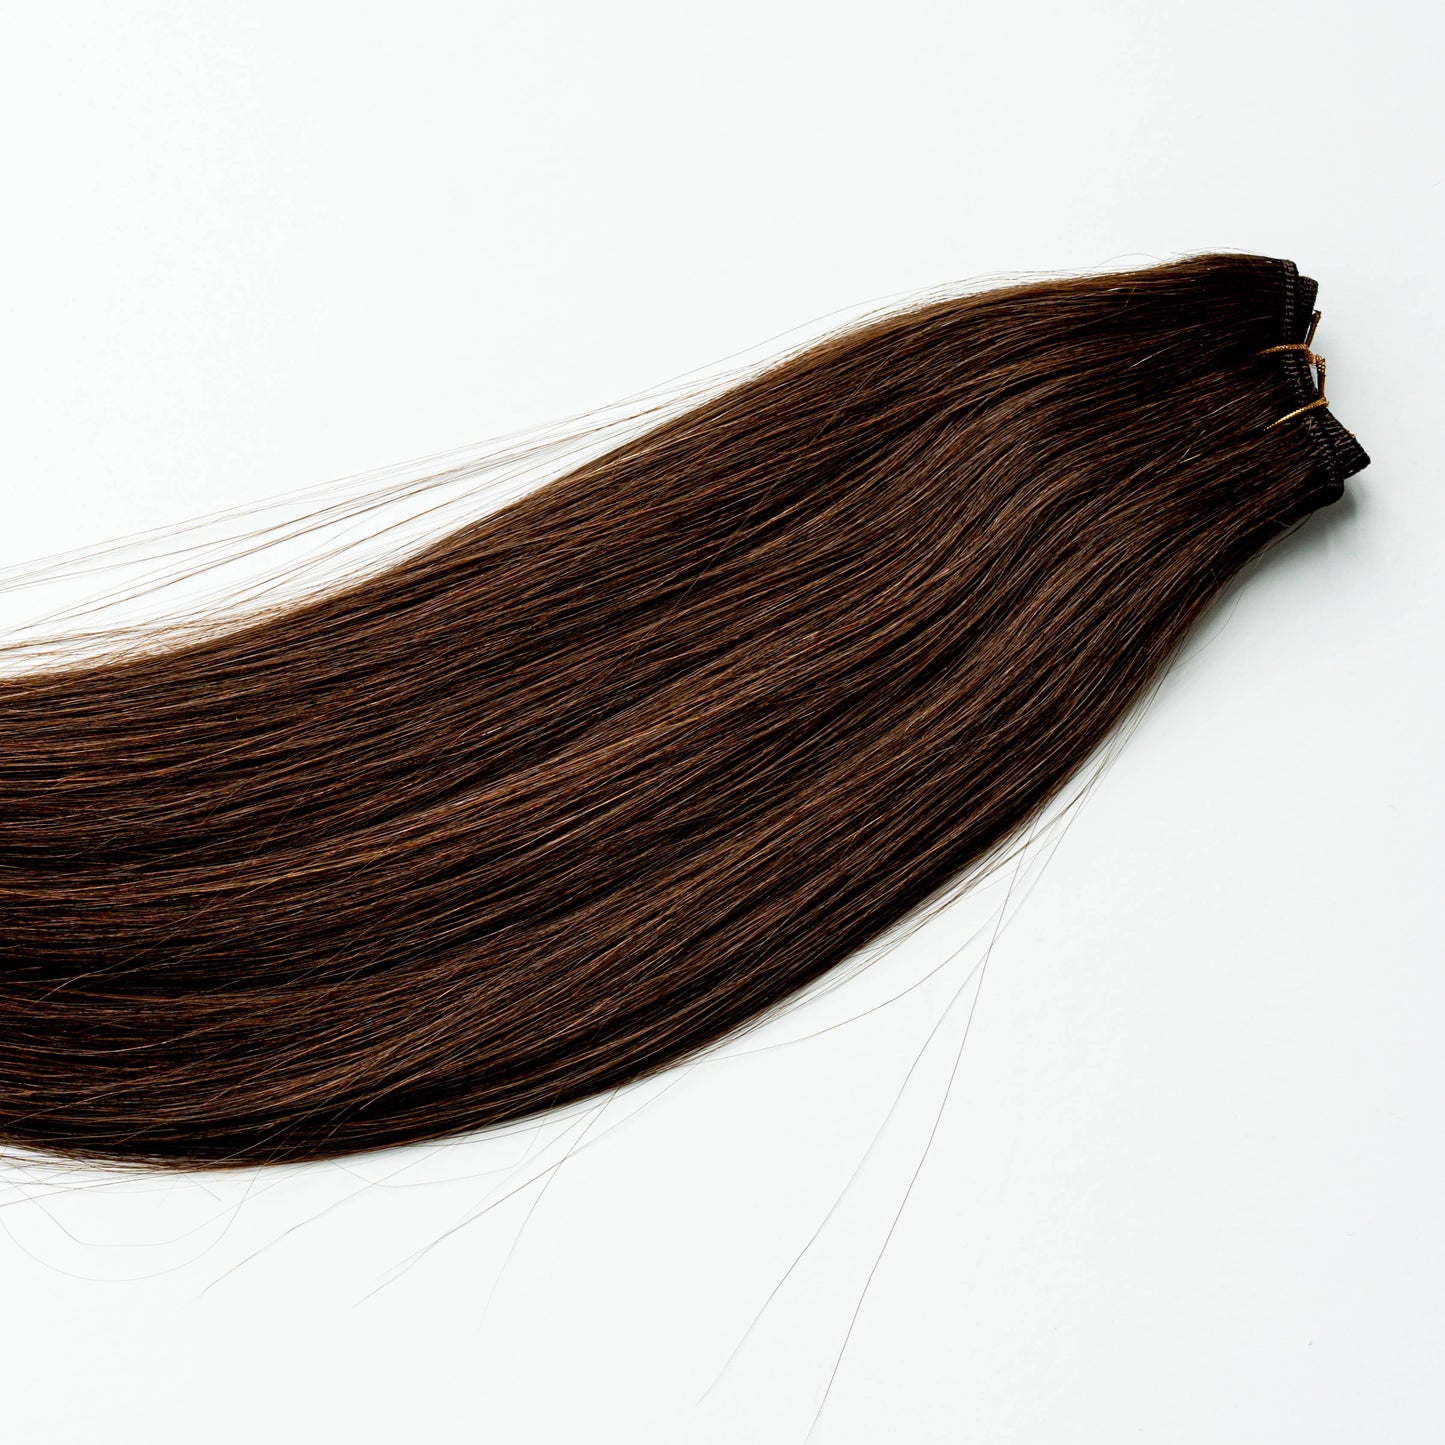 Luna | Strong Strands Machine Weft Extensions